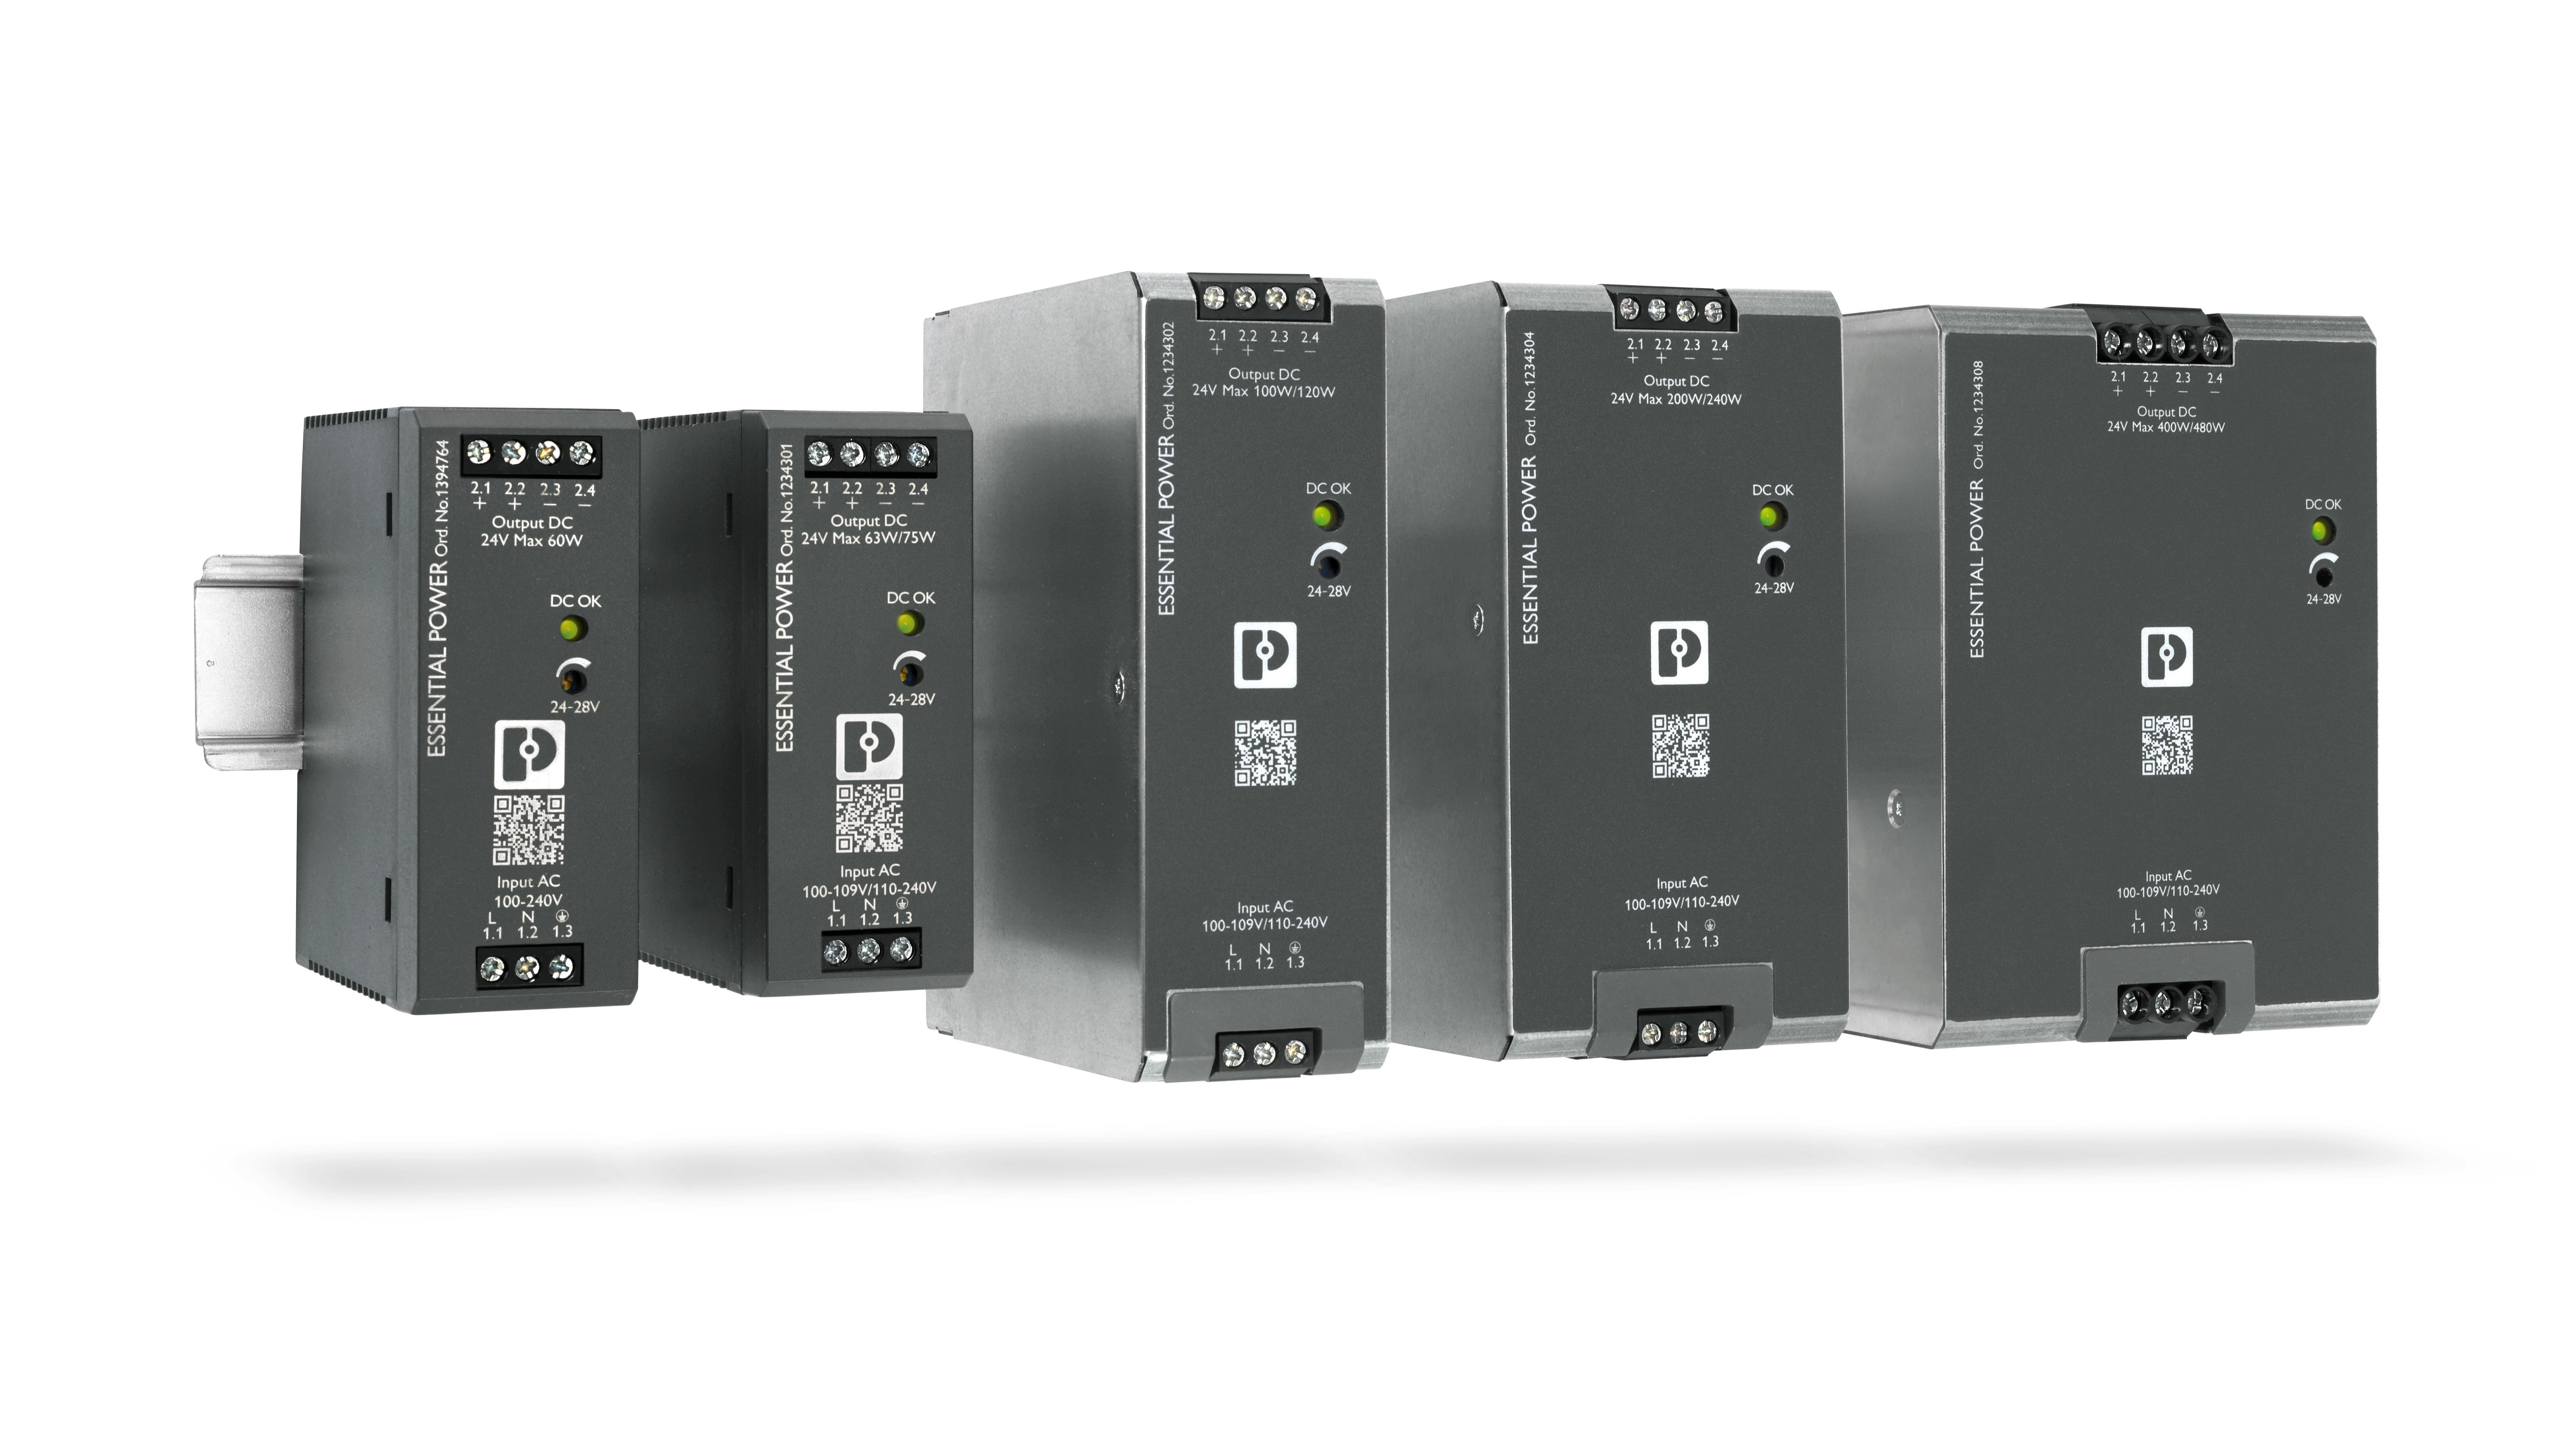 Phoenix Contact's power supplies are designed for commercial applications